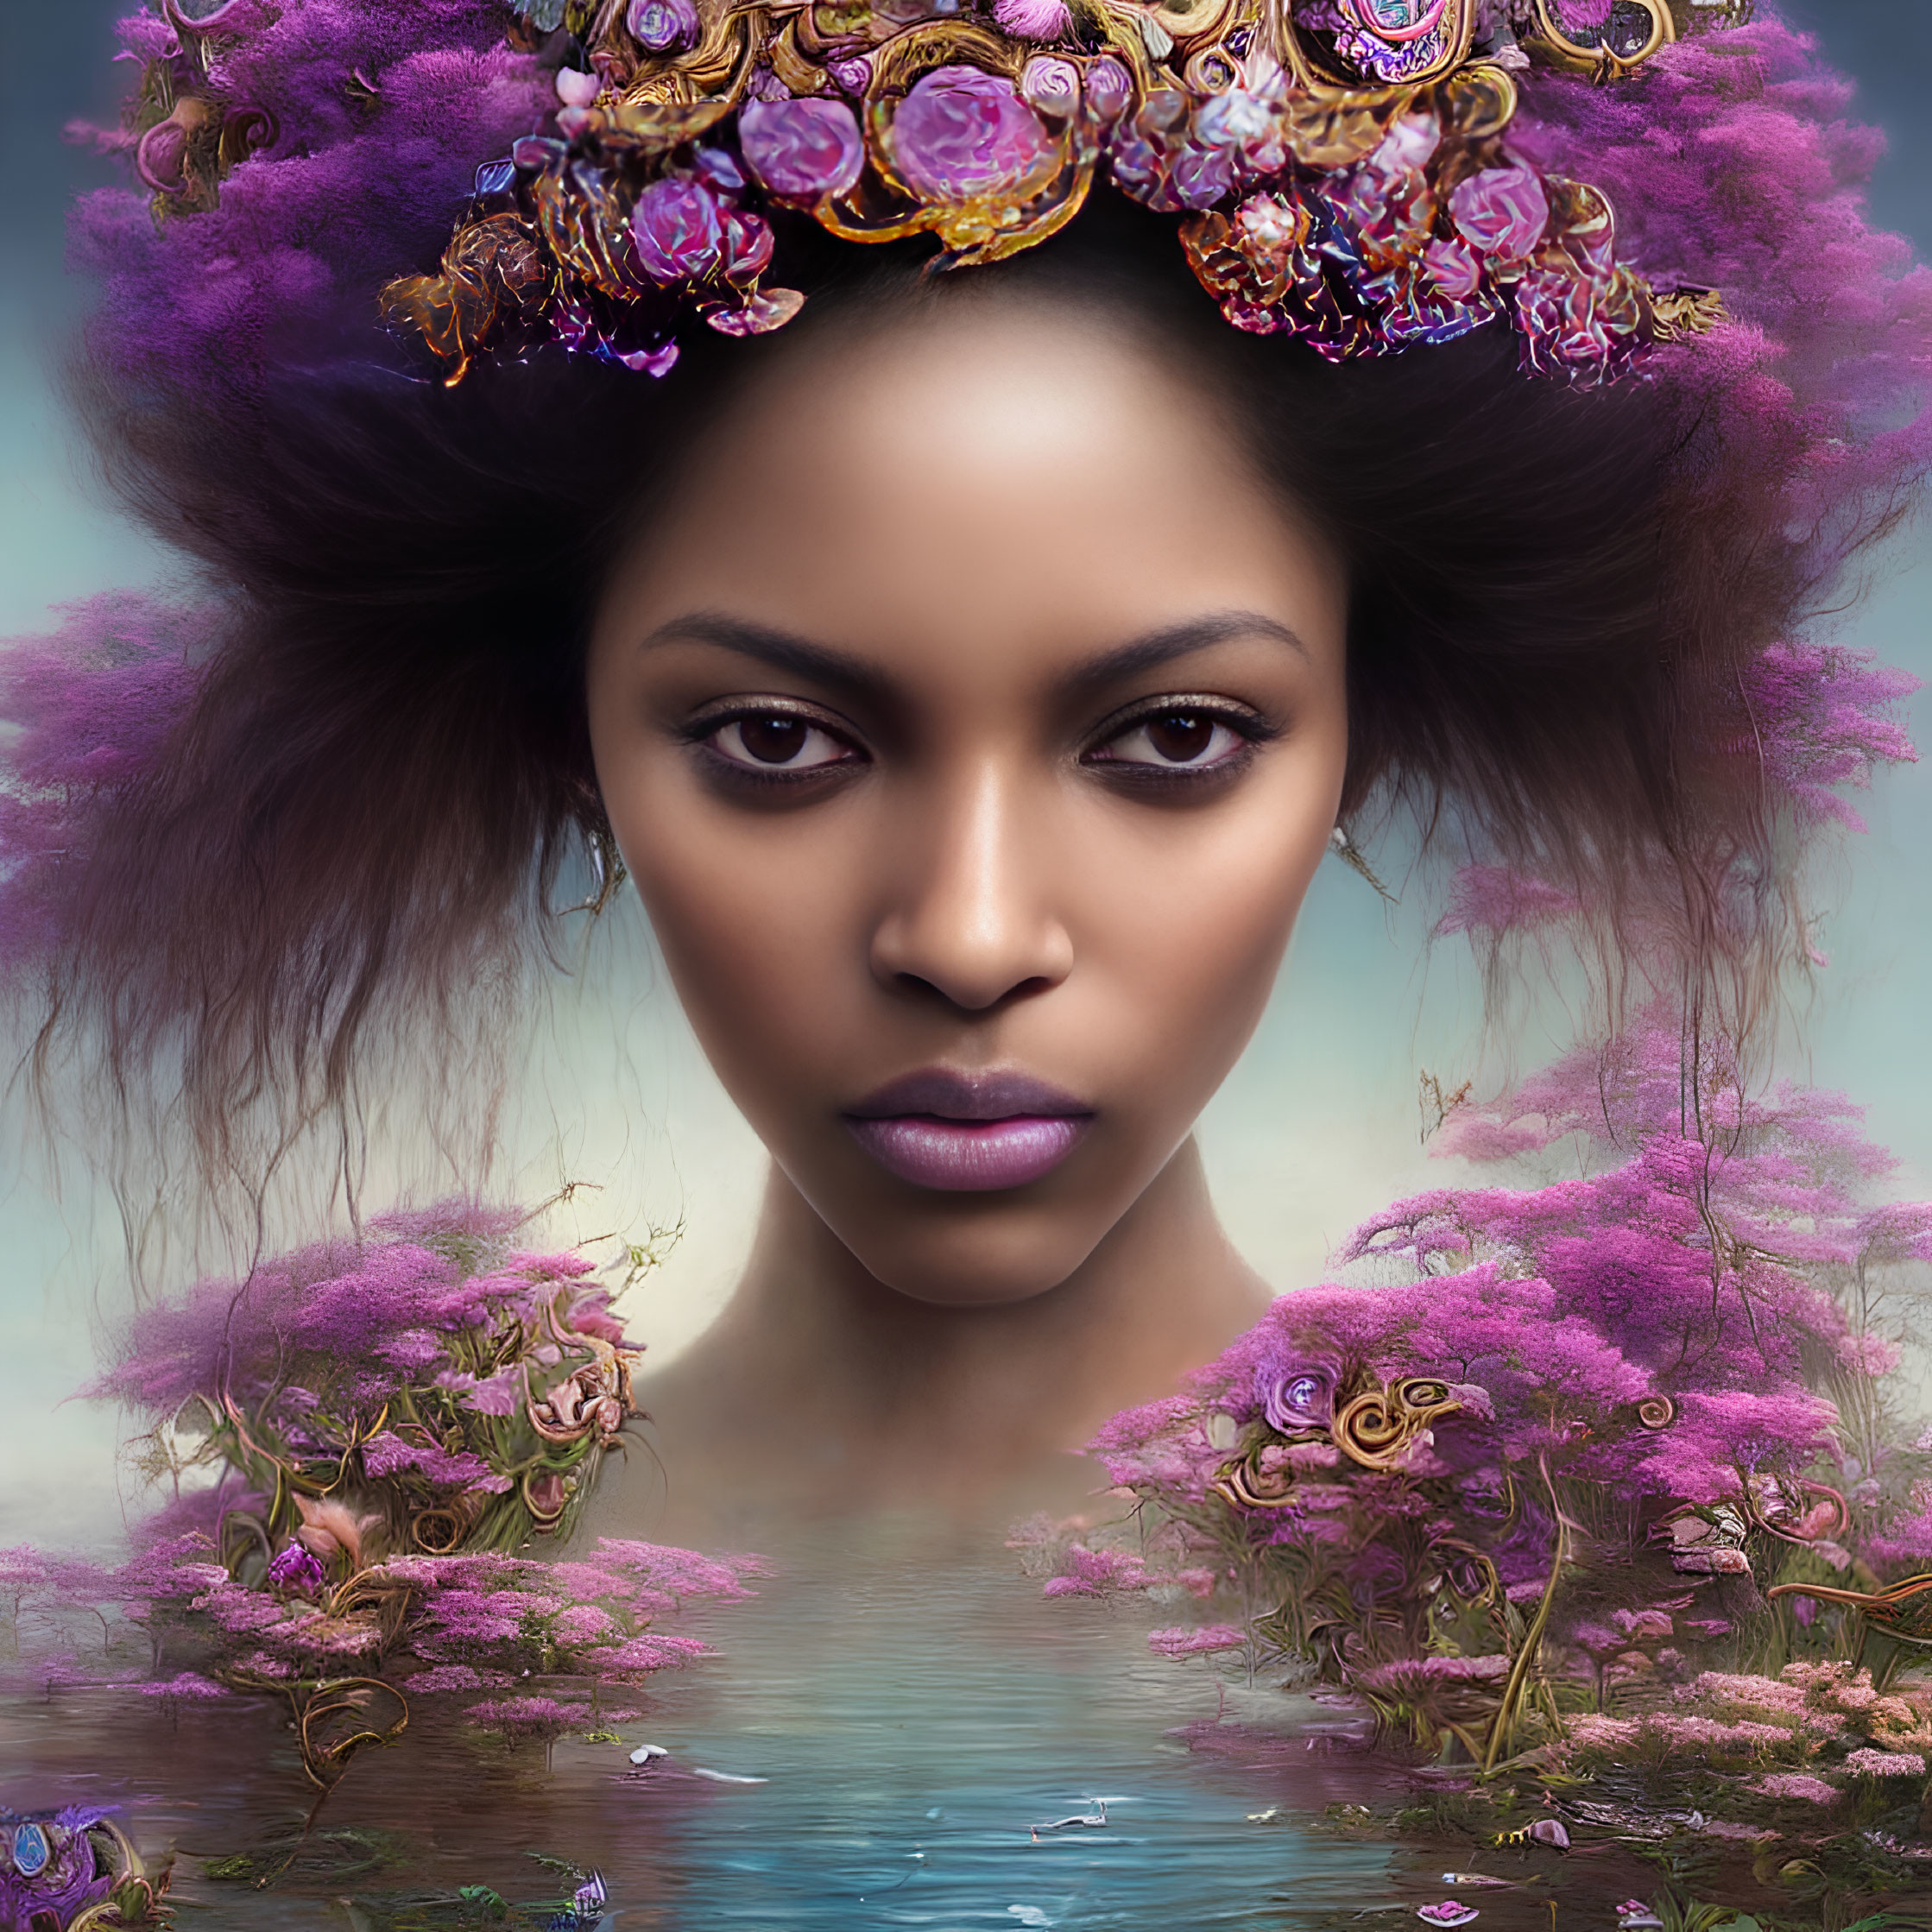 Woman with Floral Crown Reflecting in Water with Purple Blooms